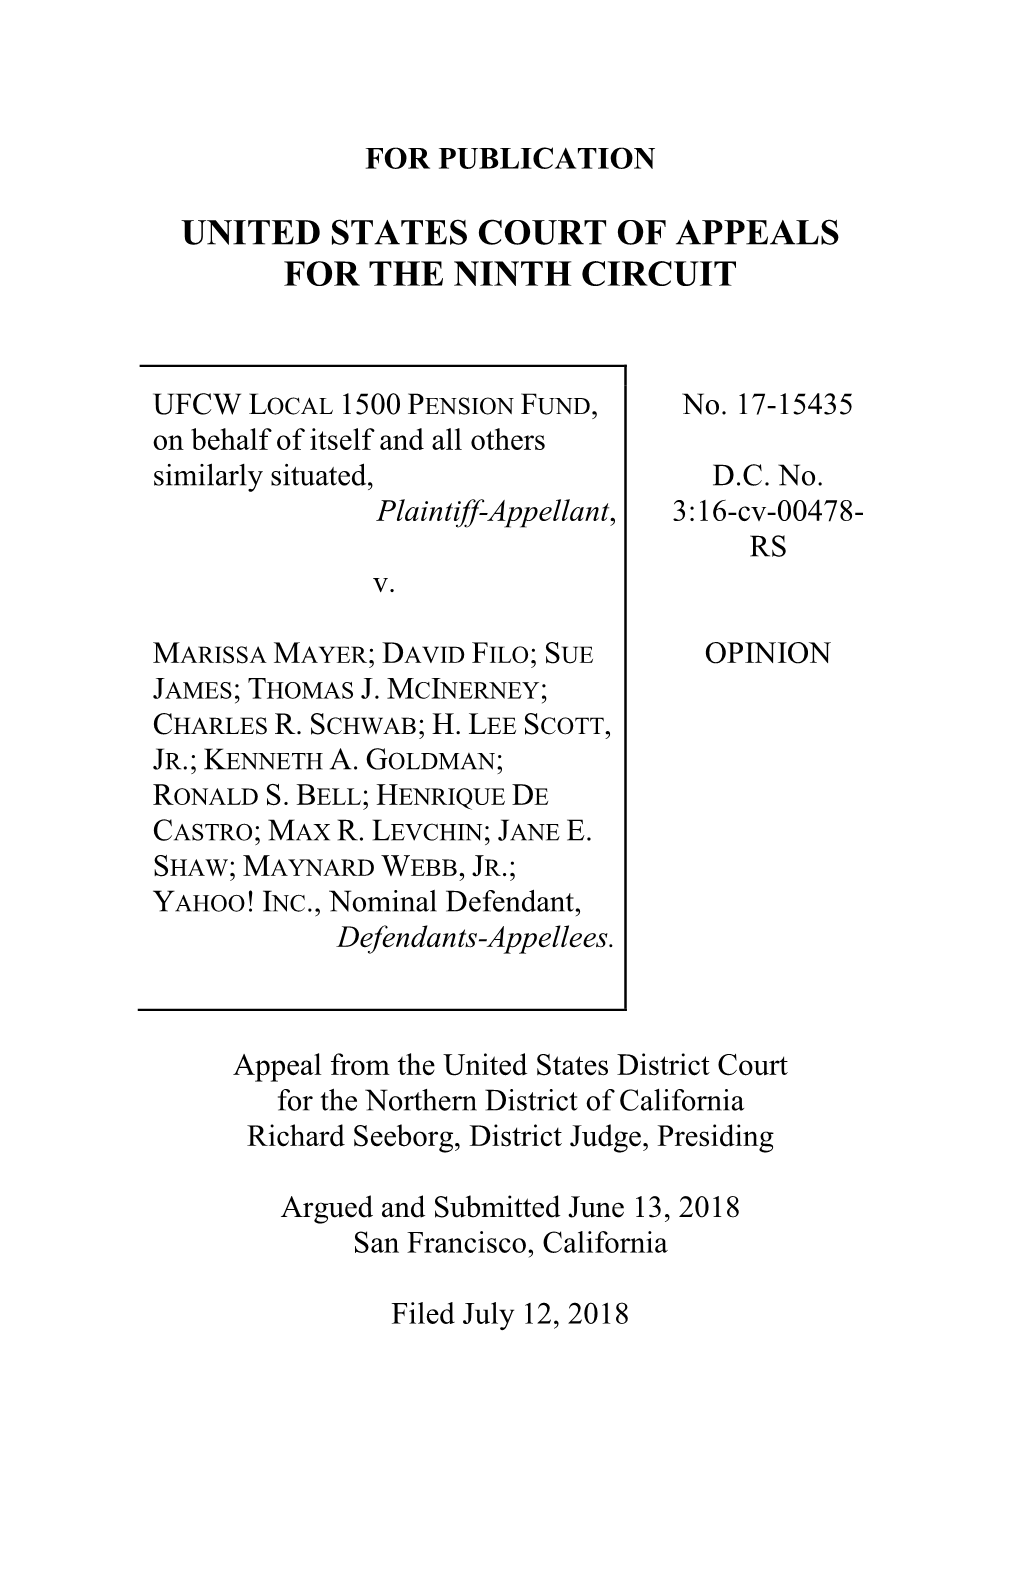 Ufcw Local 1500 Pension Fund V. Mayer